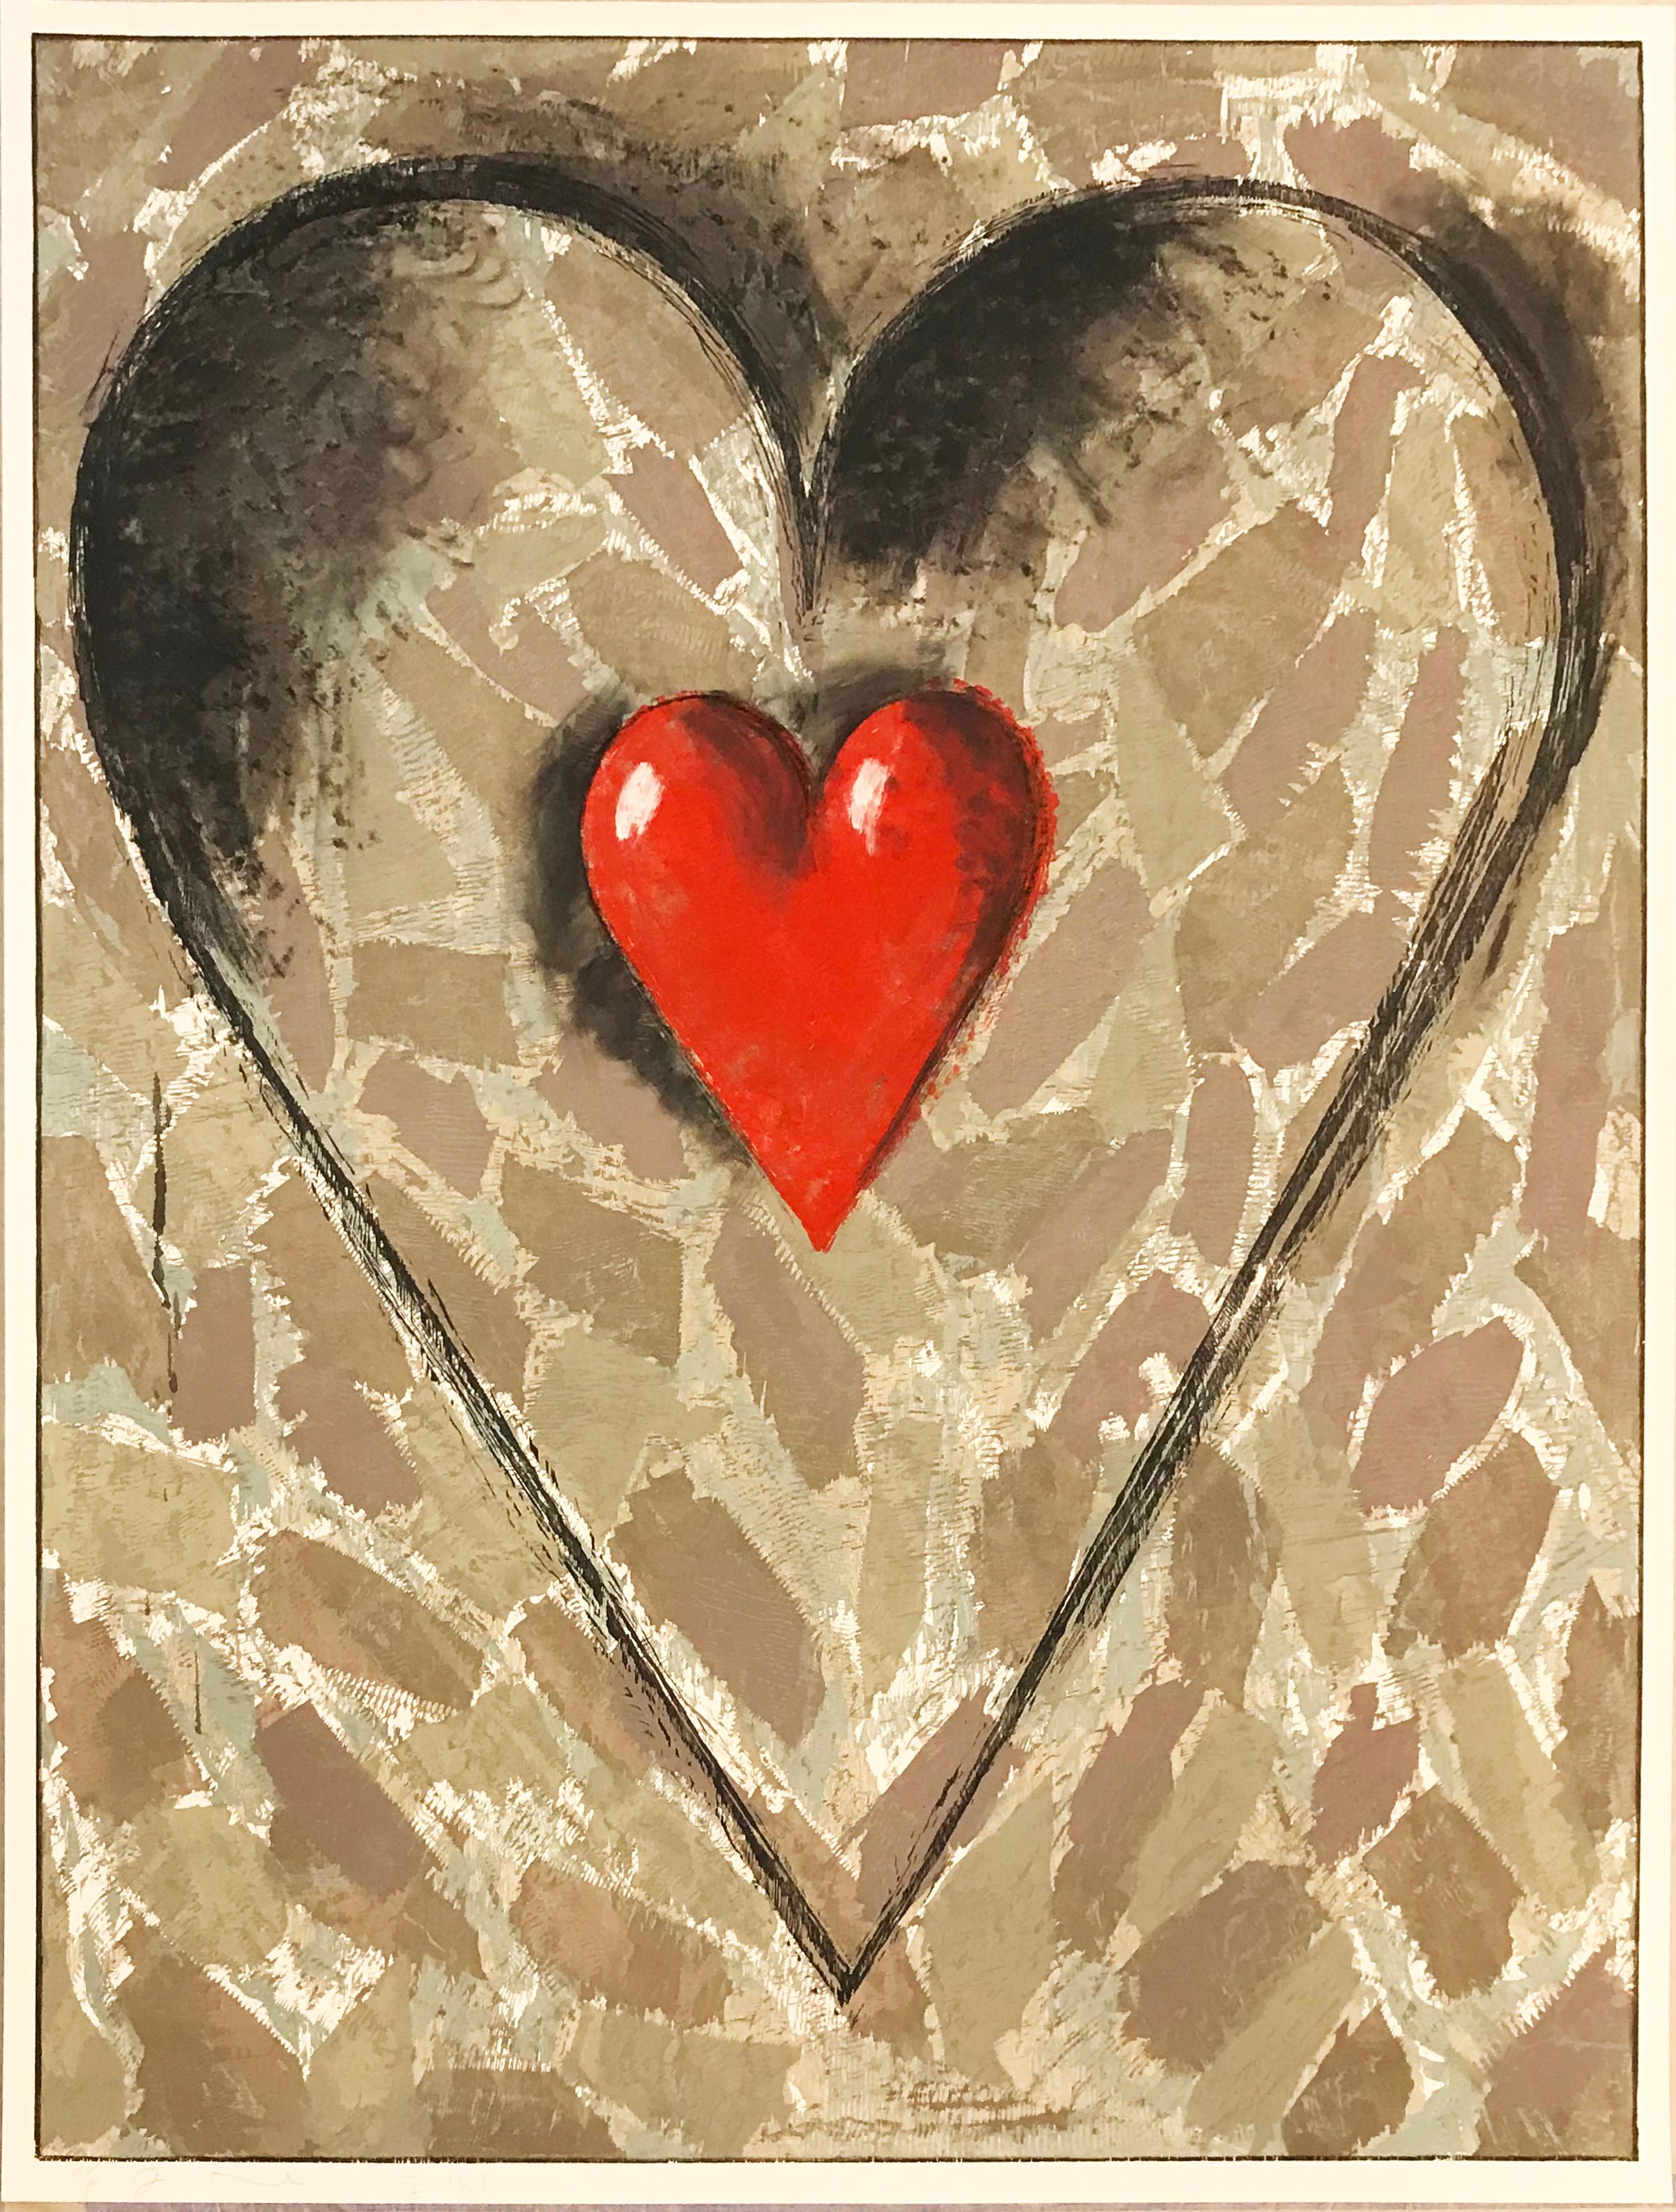 Gray Fort - Print by Jim Dine